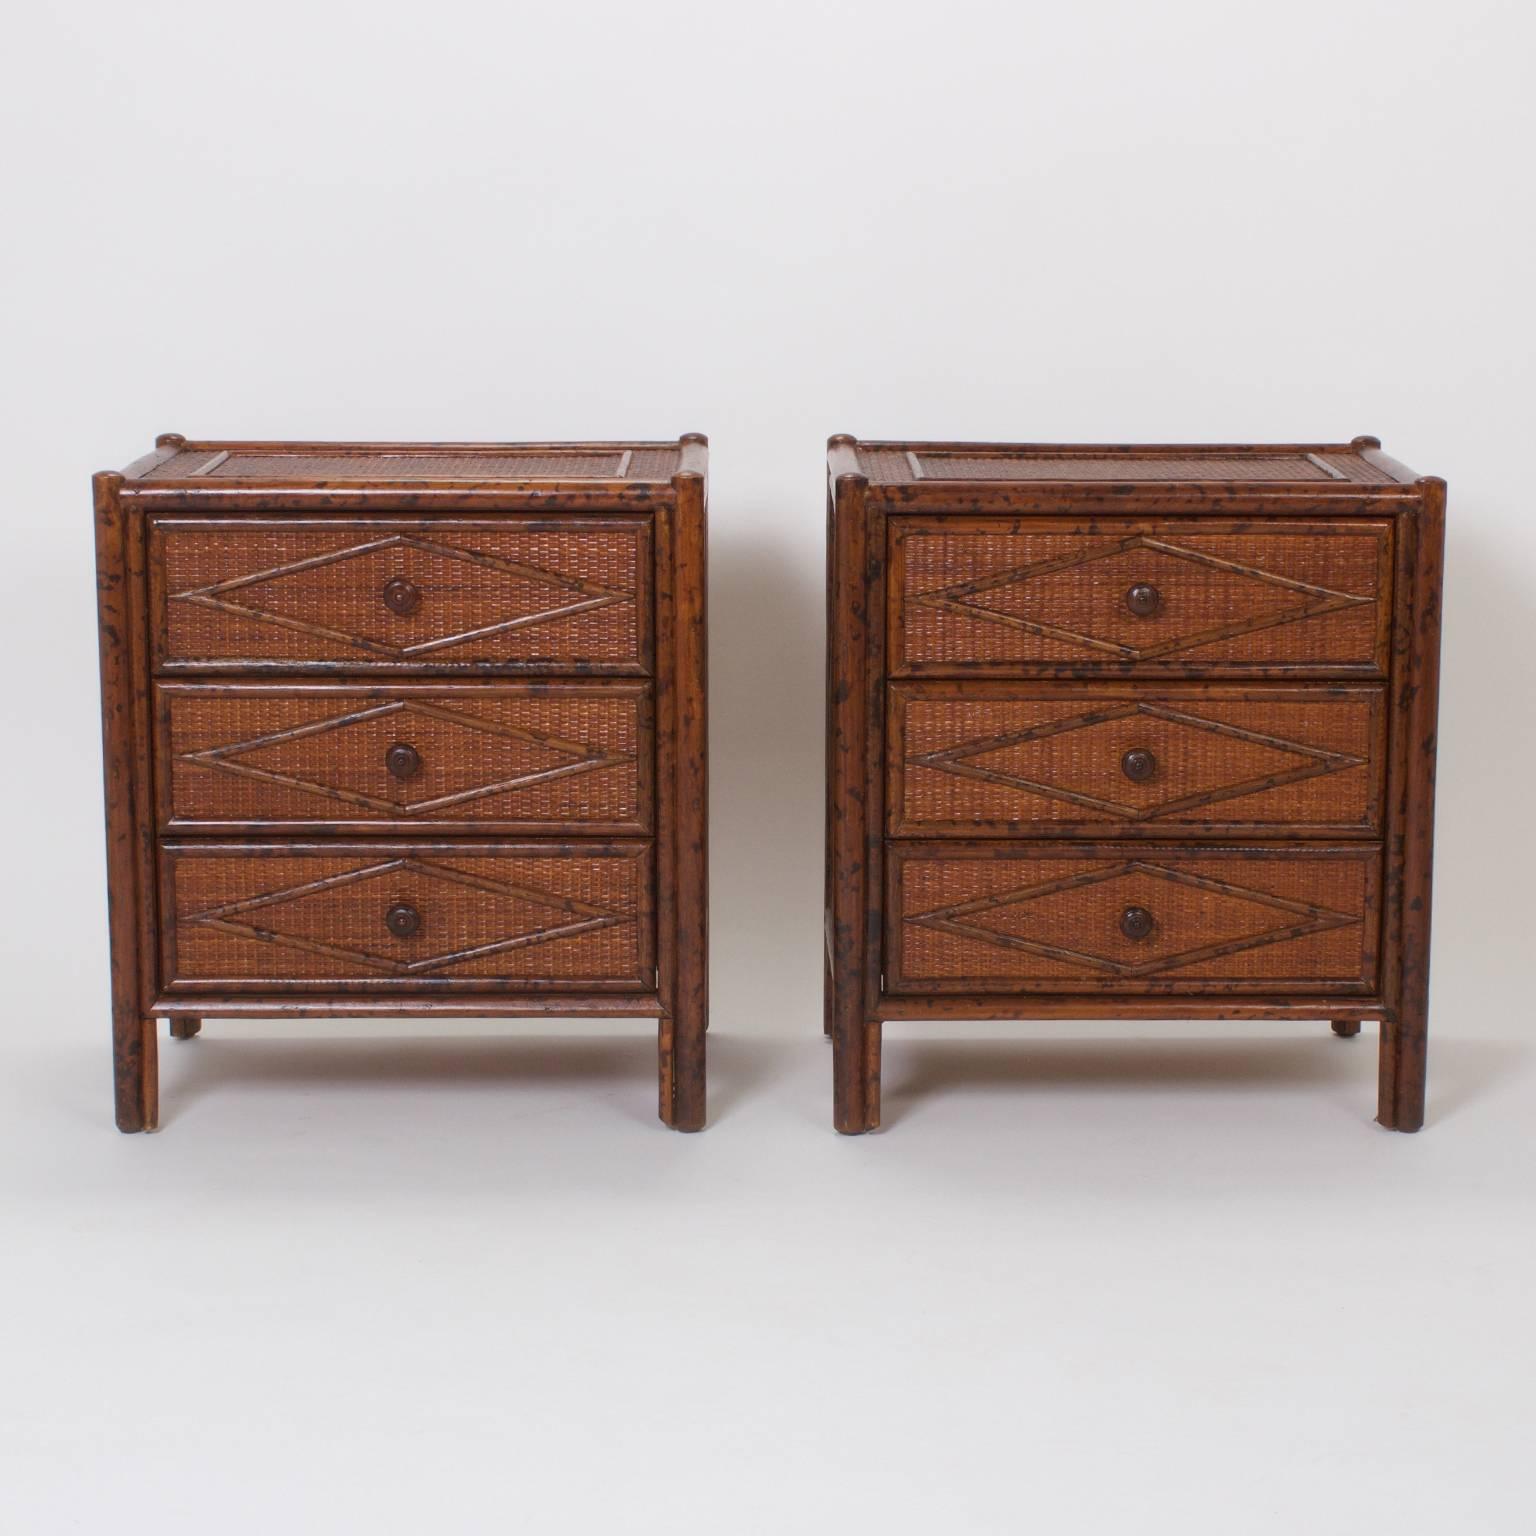 Dapper pair of three-drawer chest or nightstands, crafted in the Mid-Century with an organic mixture of materials, that feature geometric shapes of faux bamboo set on a grasscloth background, timeless yet modern.
 